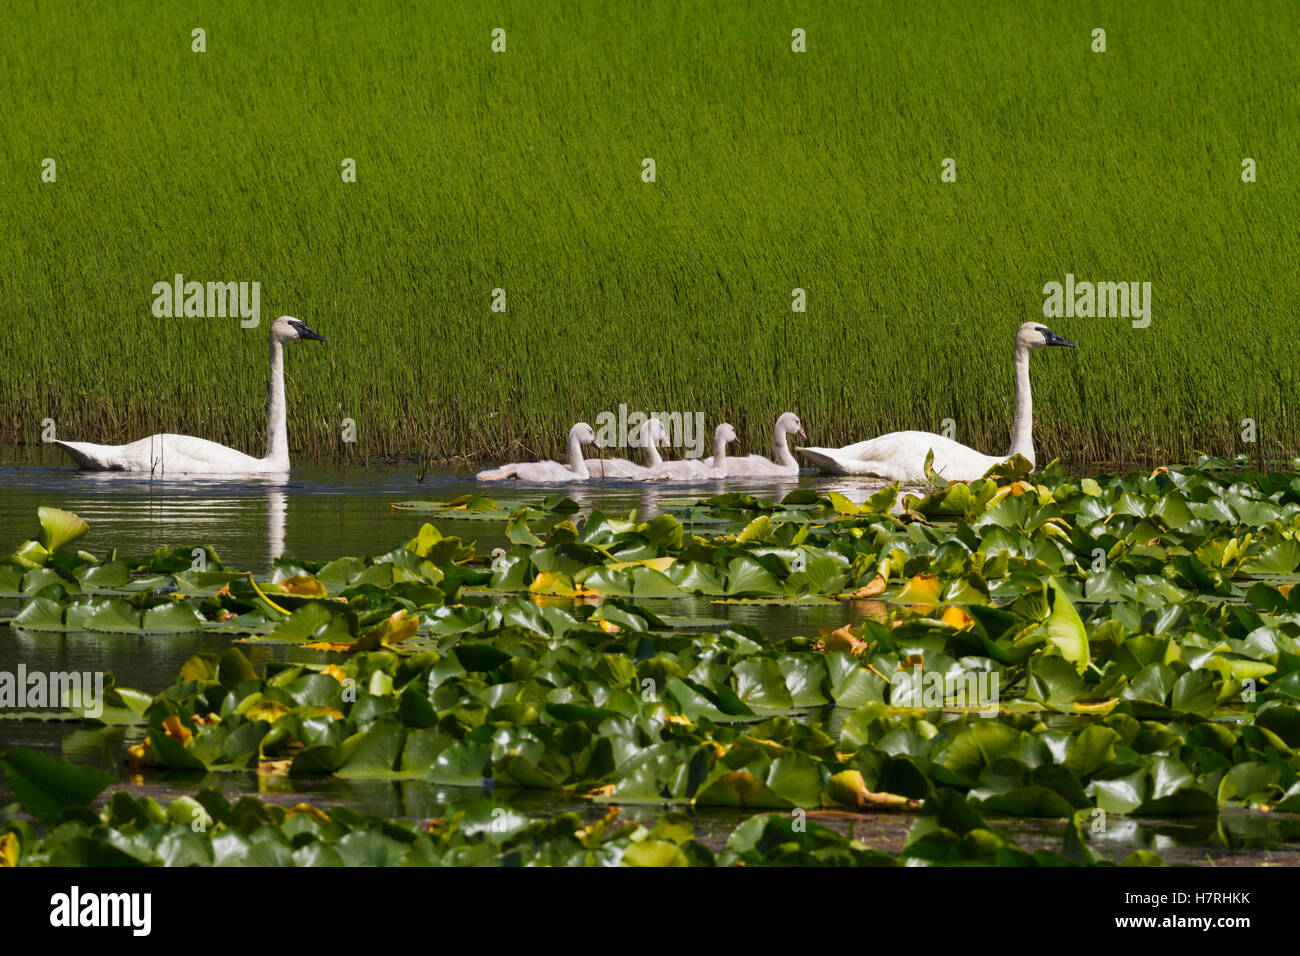 A Family Of Trumpeter Swans (Cygnus Buccinator) In A Small Pond Next To The Seward Highway At Mile 14.7 Of The Seward Highway, South-Central Alaska... Stock Photo